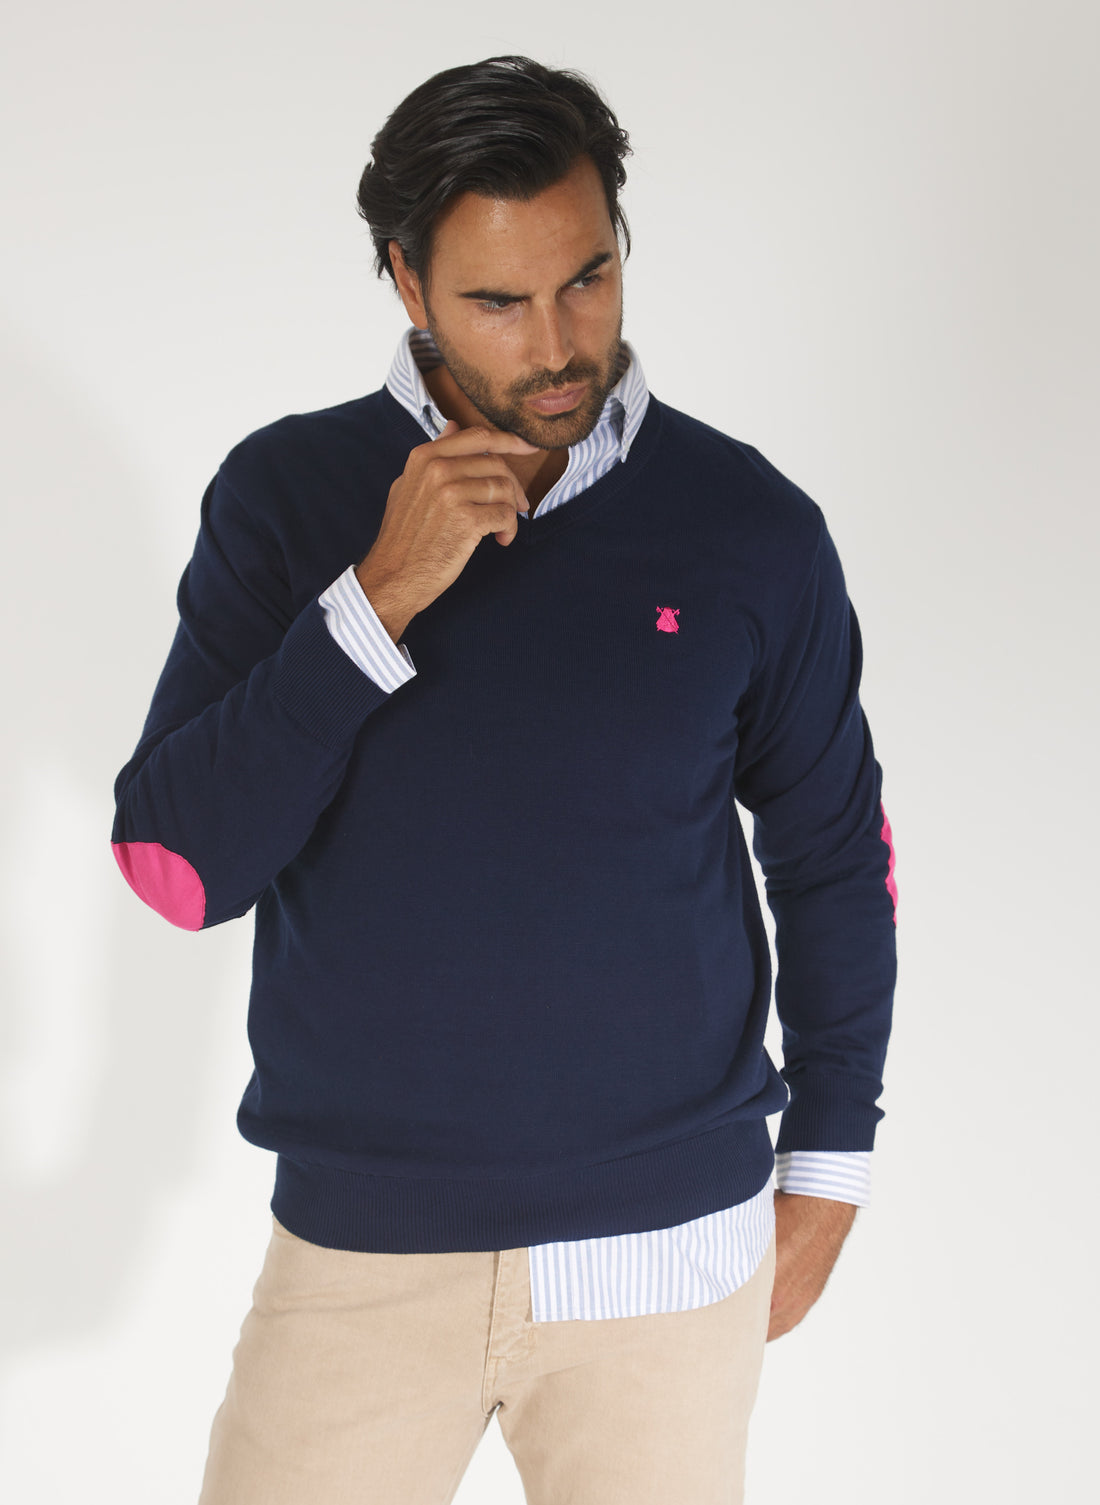 Men's Navy Blue Pink Elbow Patches Sweater